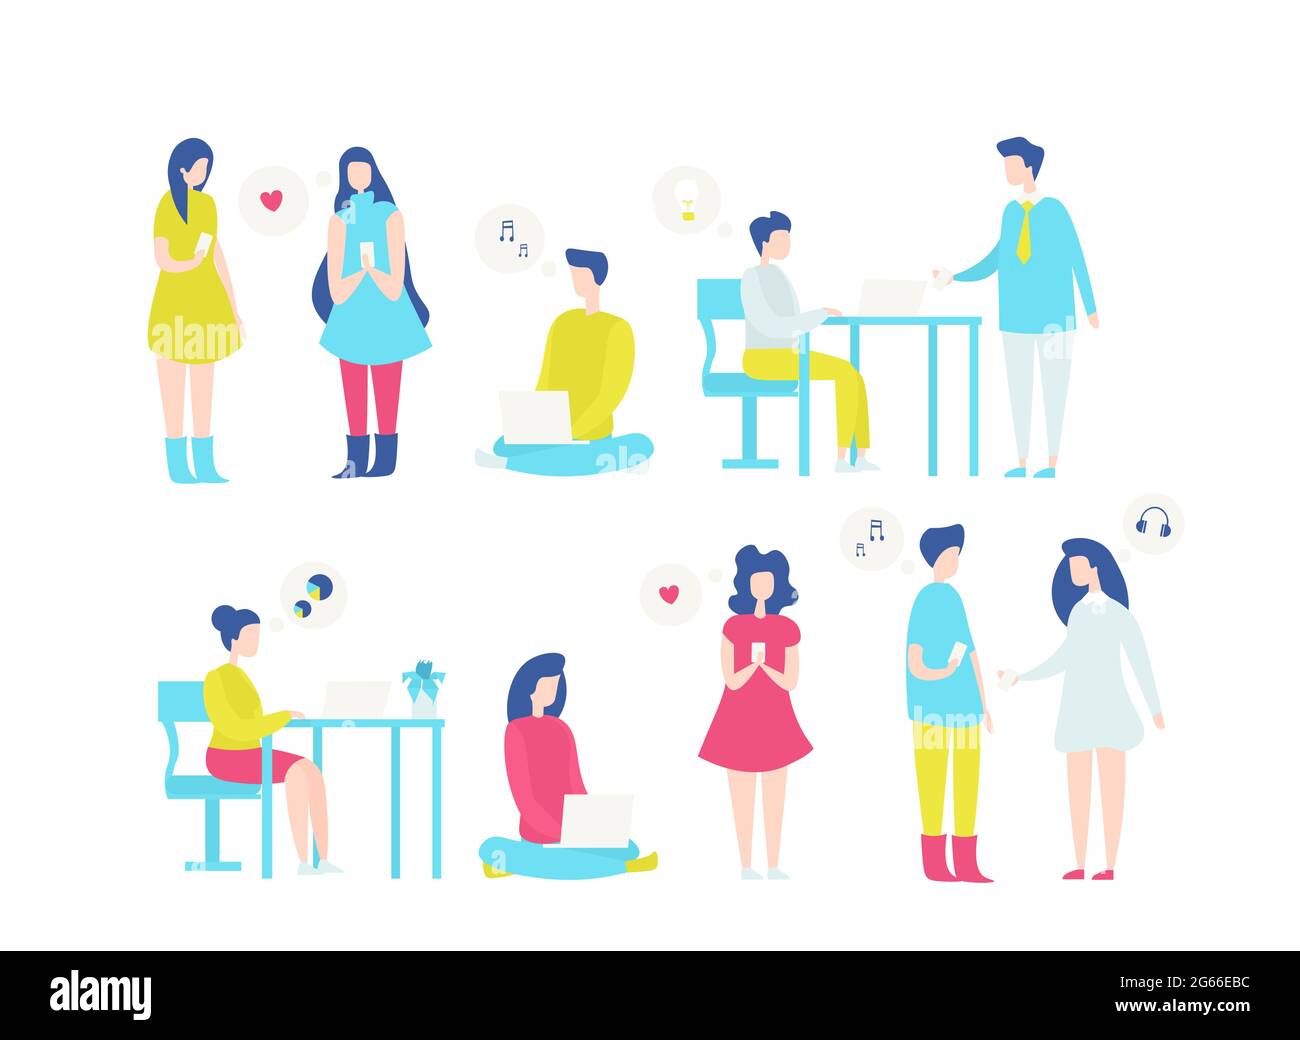 People with laptops flat vector illustrations set. Cartoon girls with smartphones chatting, sending romantic message. Office worker using computer Stock Vector